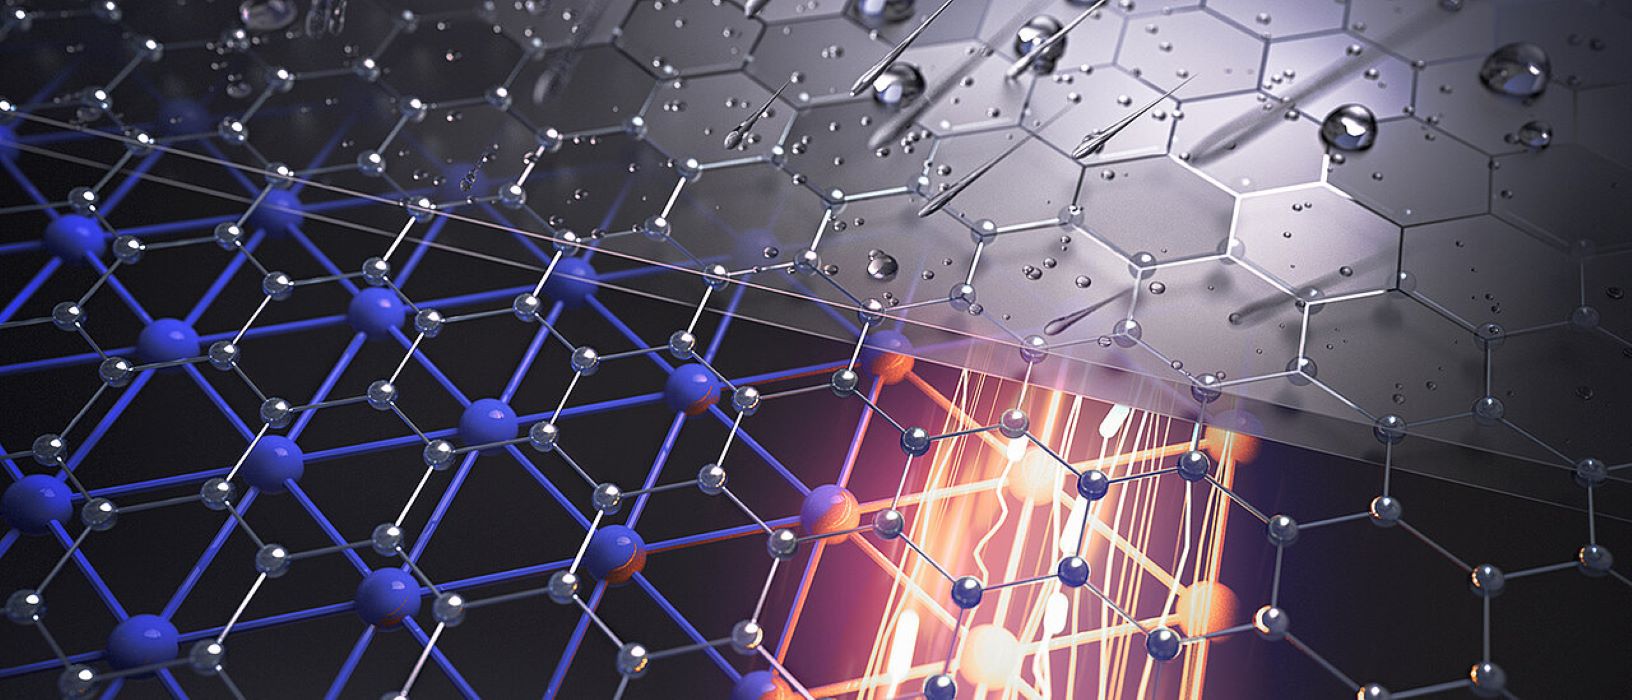 graphene layer protects against water